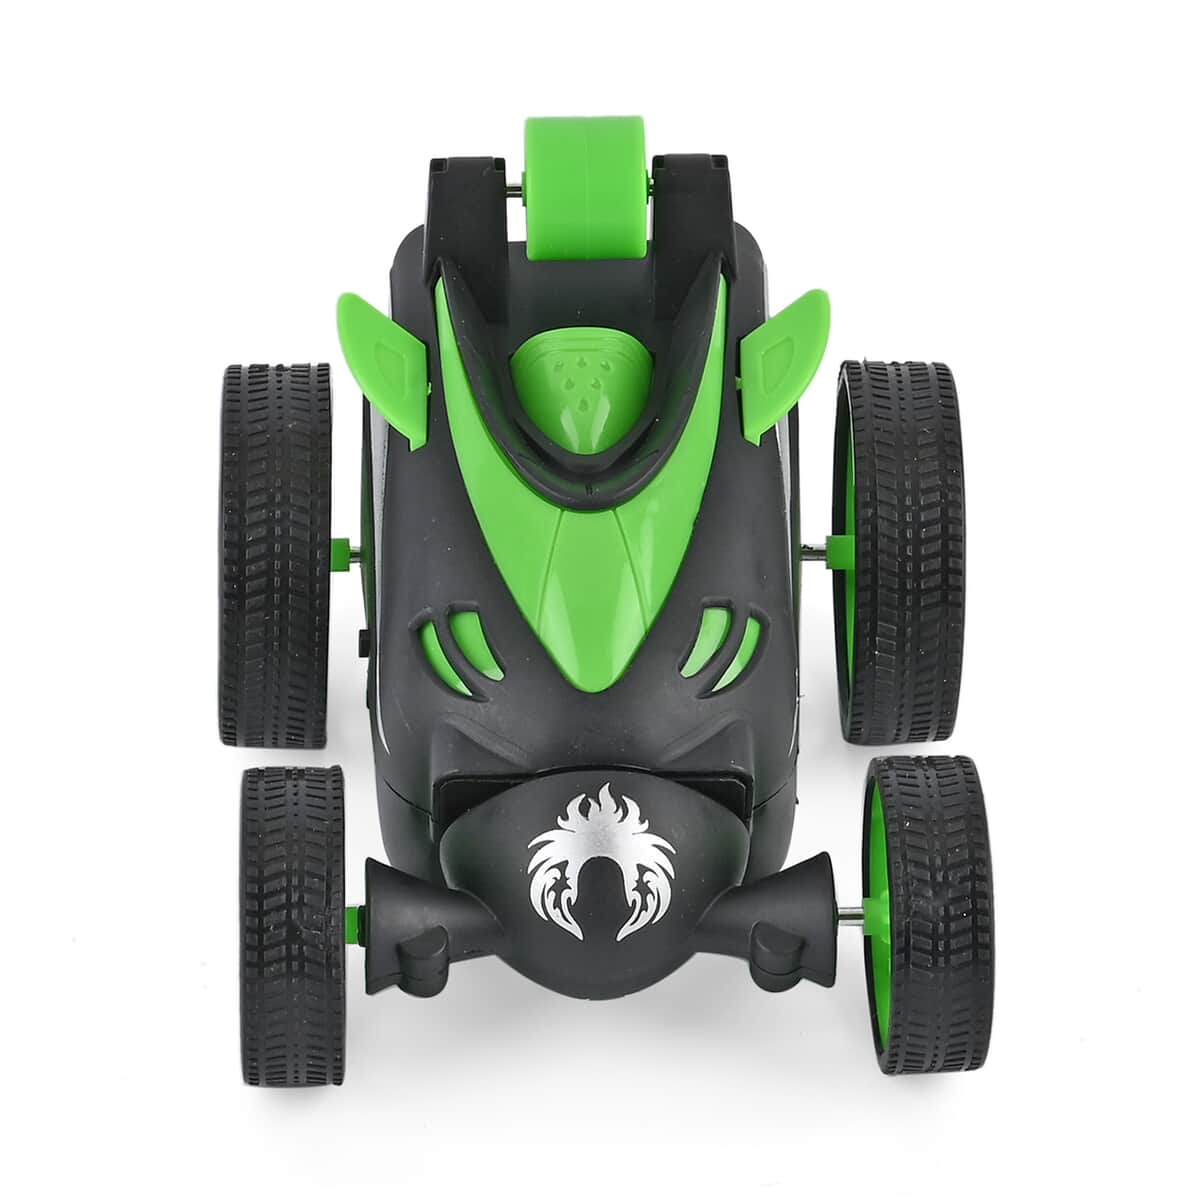 Green 4 Channels RC Stunt Car with Lights and Remote Control, Kids Stunt Car Toy For Birthday Gift (3xAAA Not Included) image number 1